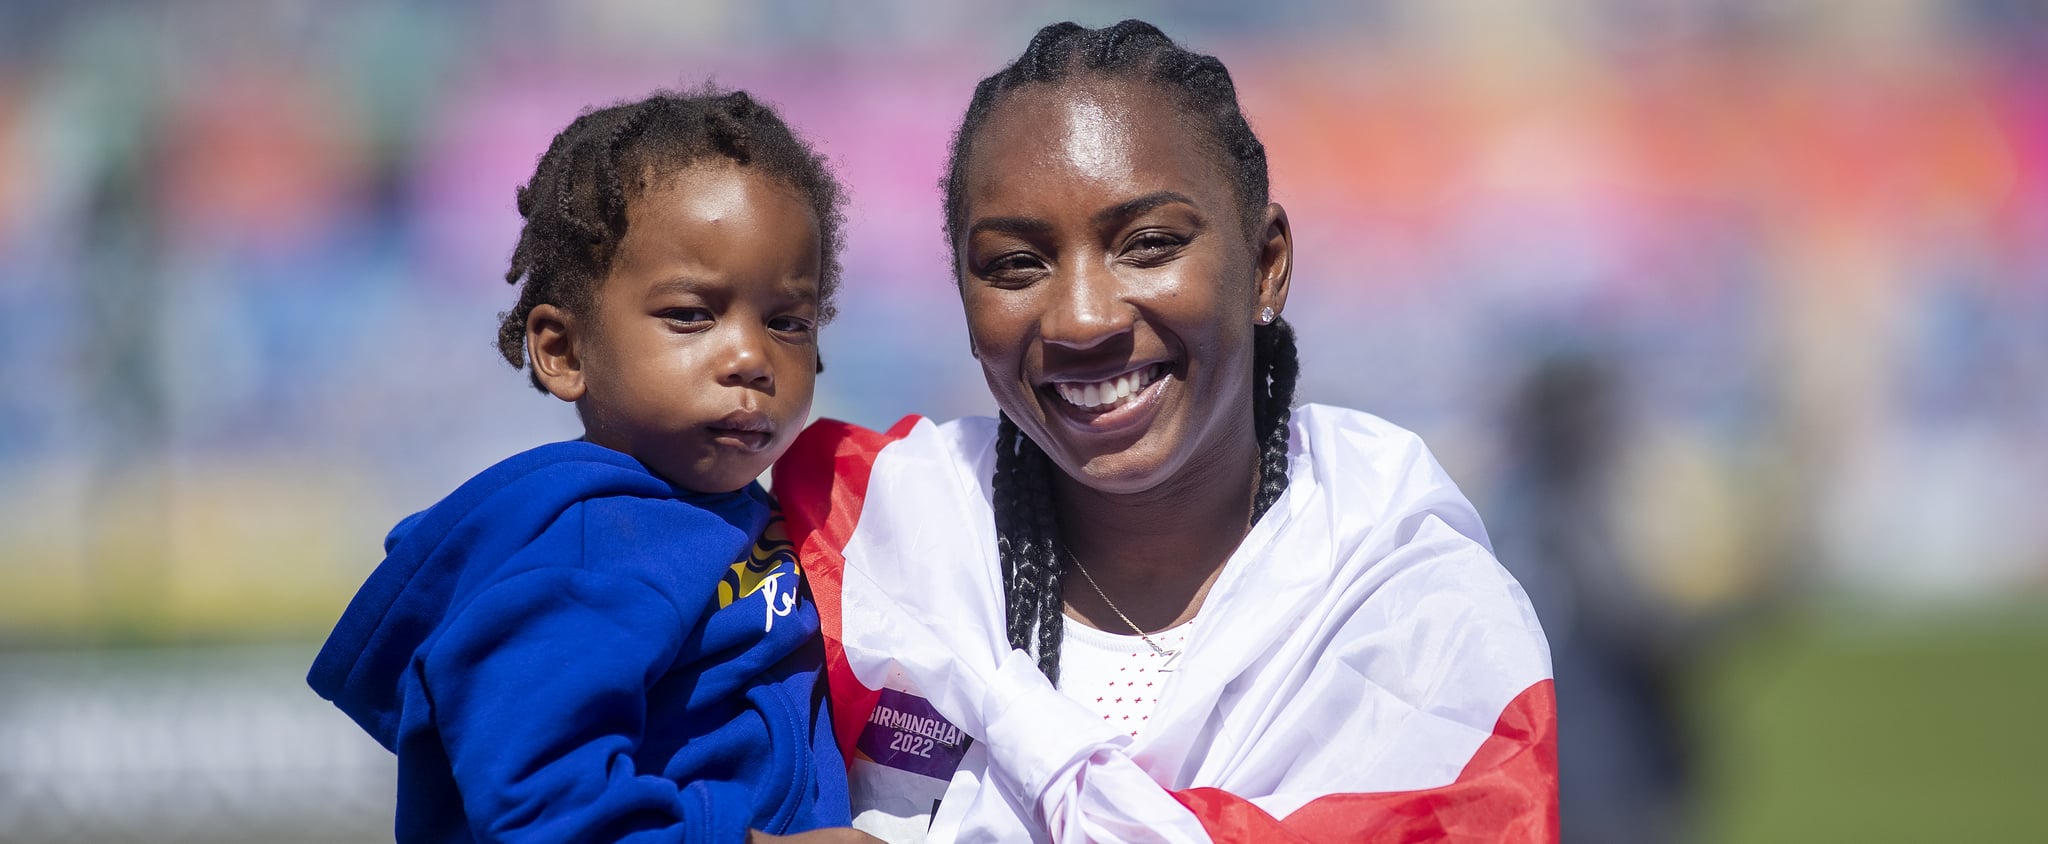 Bianca Williams: "I'm Proof You Can Be an Athlete and Mum"